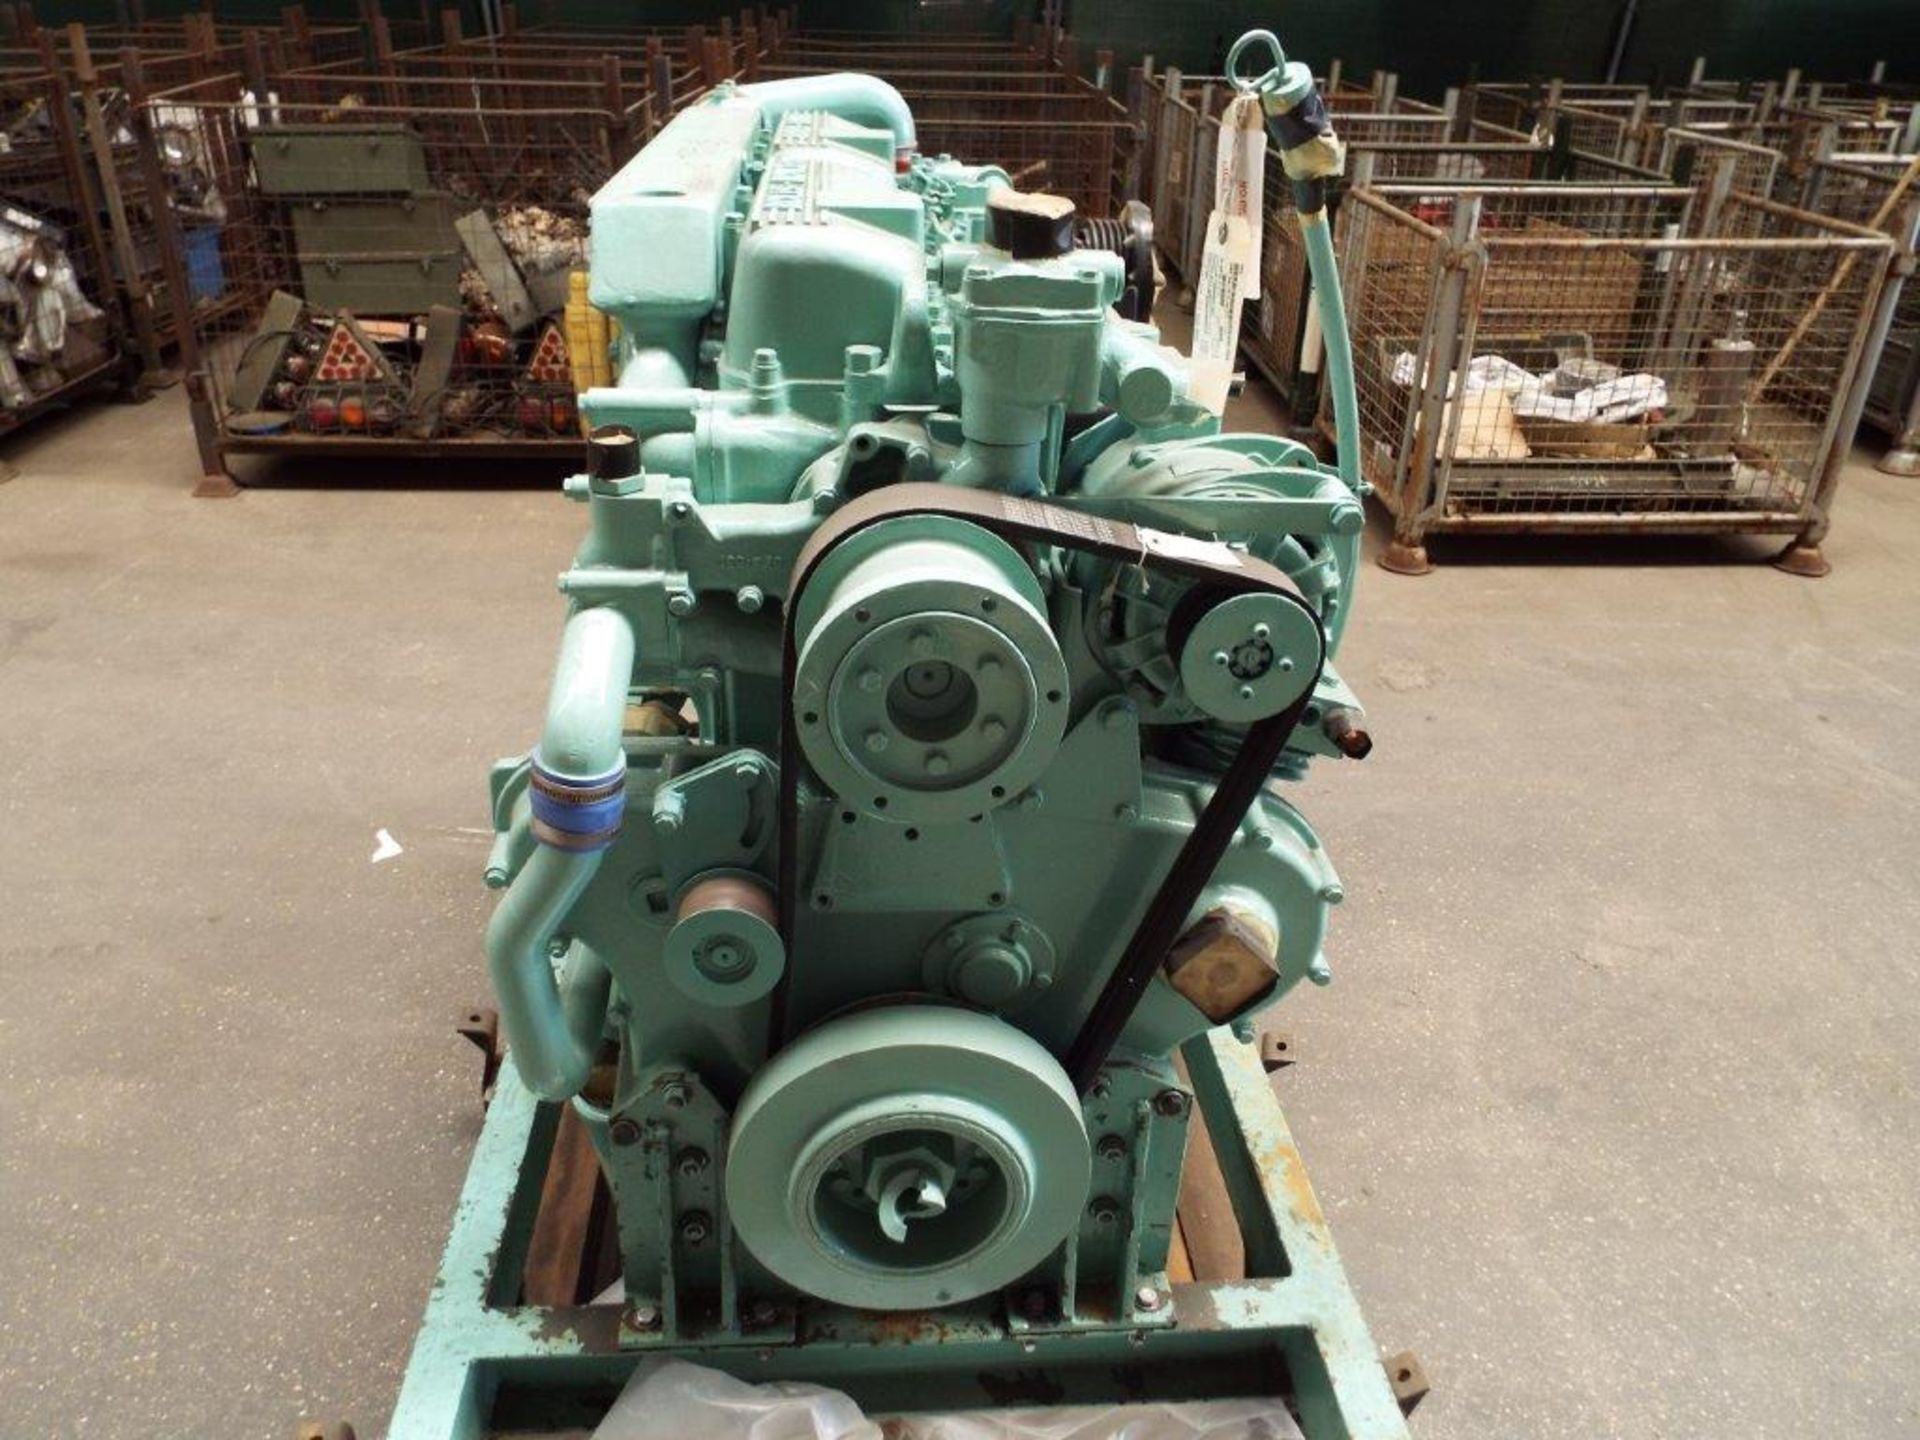 A1 Reconditioned Rolls Royce/Perkins 290L Straight 6 Turbo Diesel Engine for Foden Recovery Vehicles - Image 2 of 20